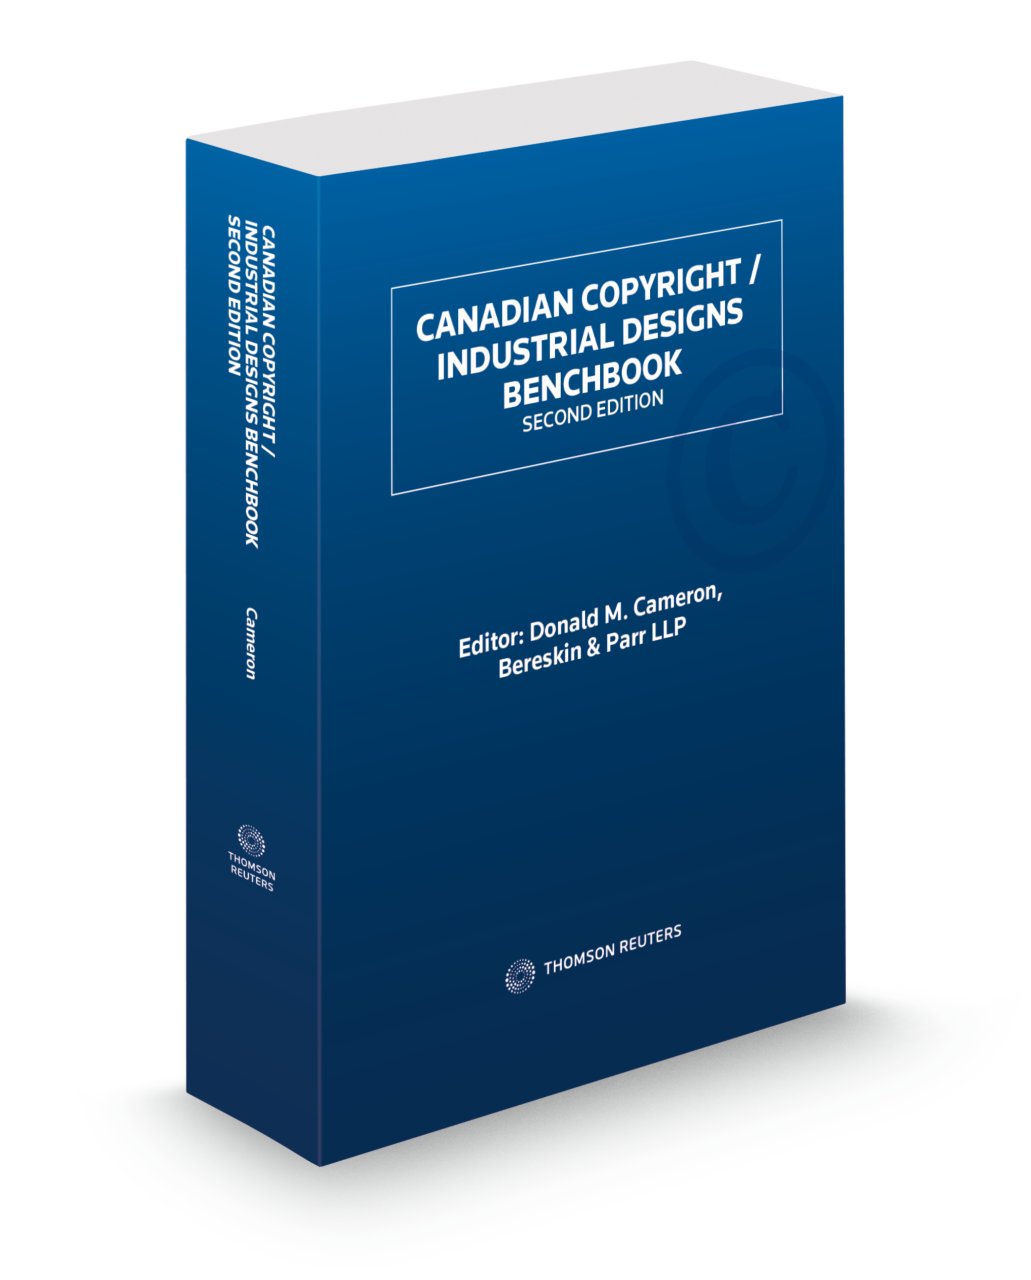 Canadian Copyright/Industrial Designs Benchbook, Second Edition cover